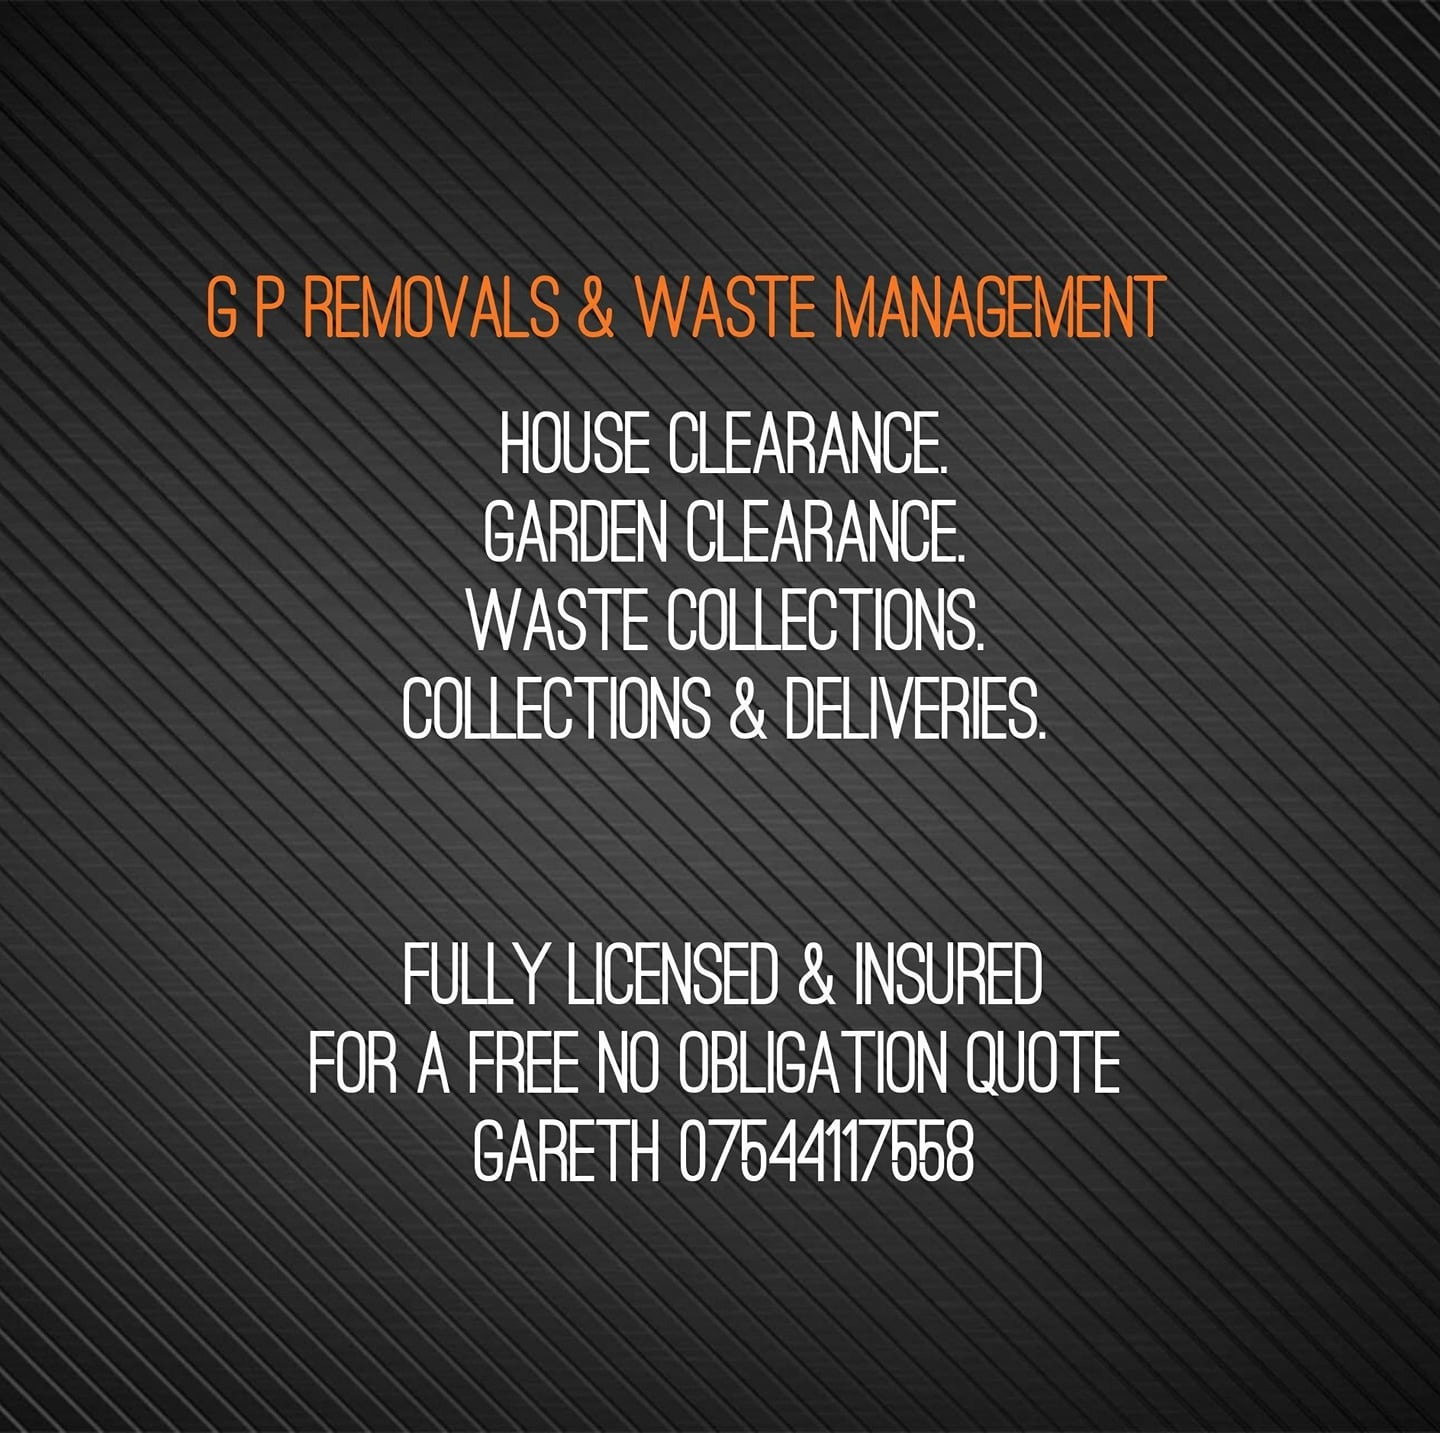 Logo of G P Removals & Waste Management Solid Waste Services And Recycling In Swadlincote, Derbyshire